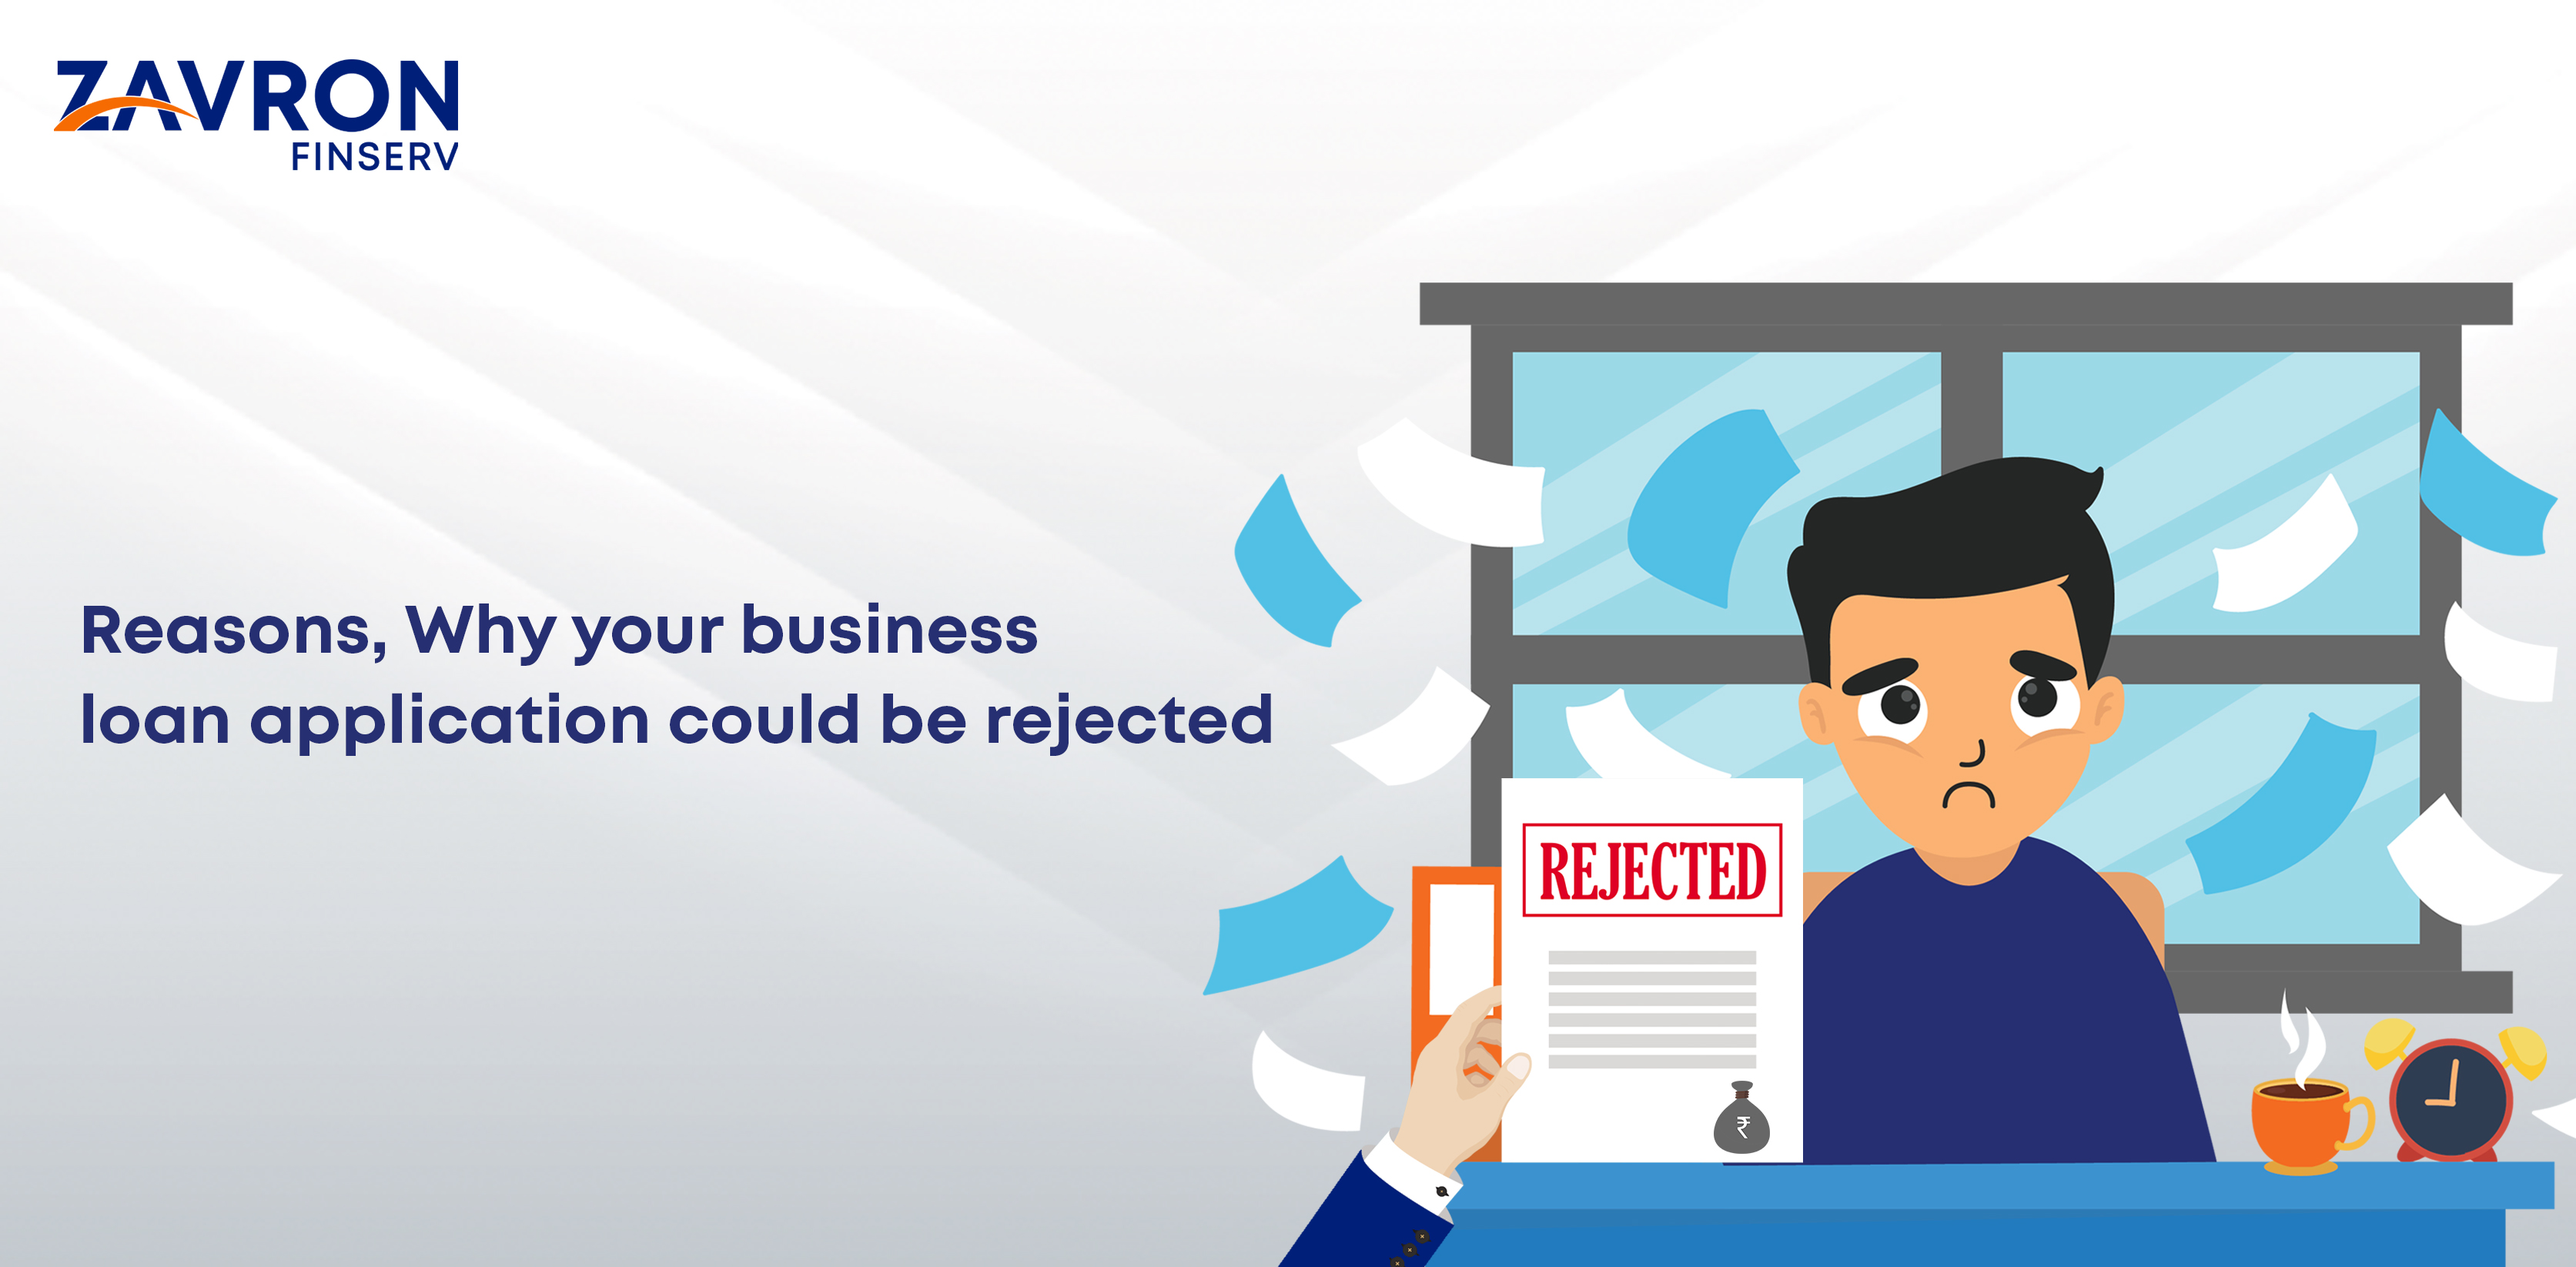 Reasons Why Your Business Loan Application could be Rejected